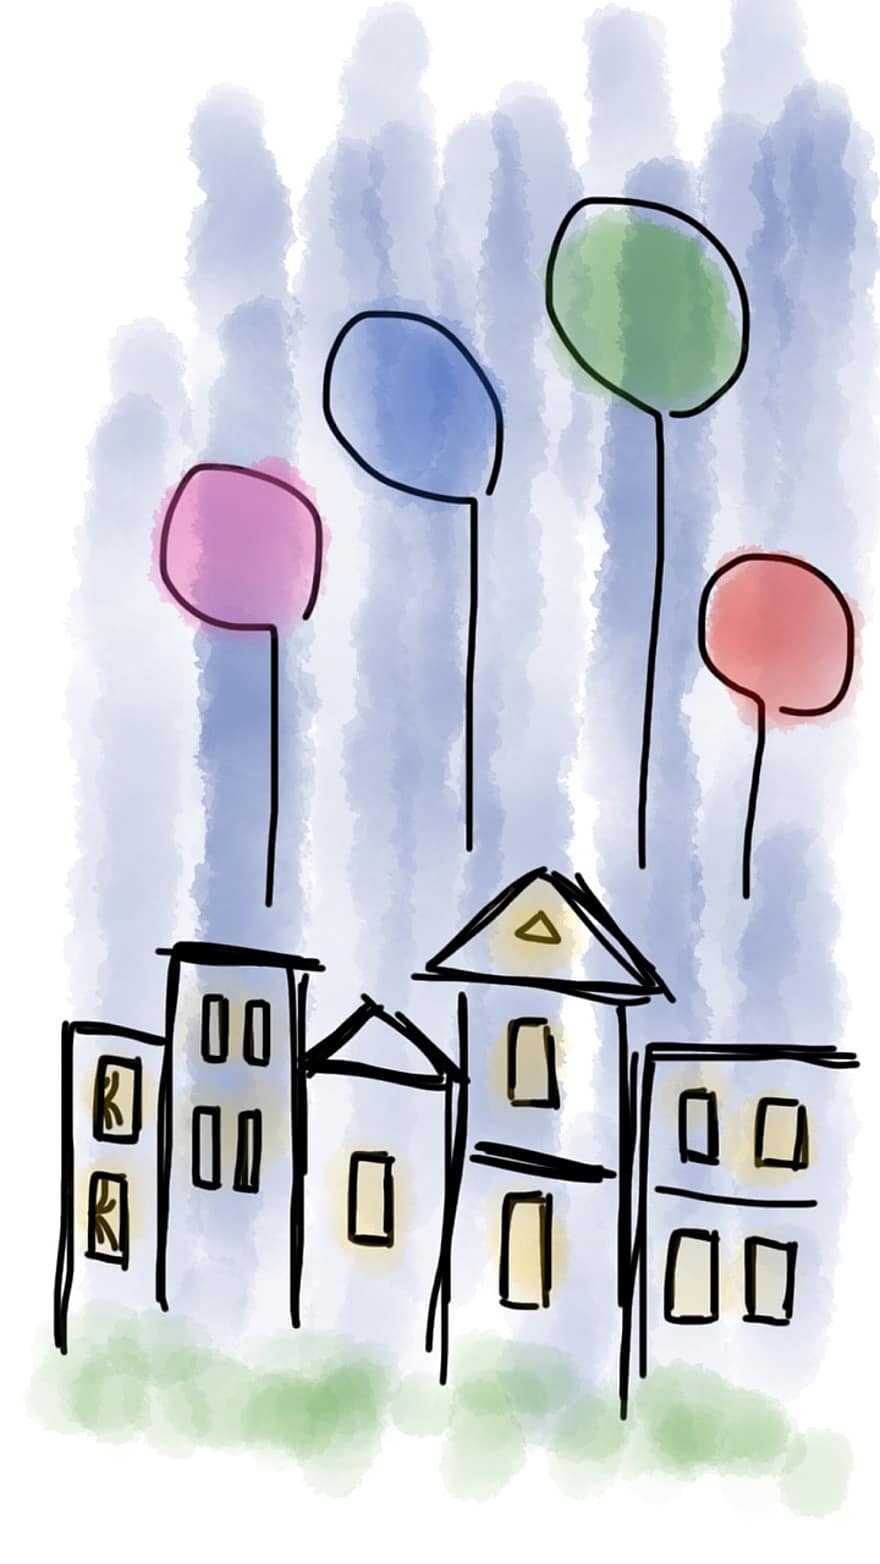 Balloon, House, Building, Night, Colorful, Blue, Dark, Light, Fly, Landscape, Color